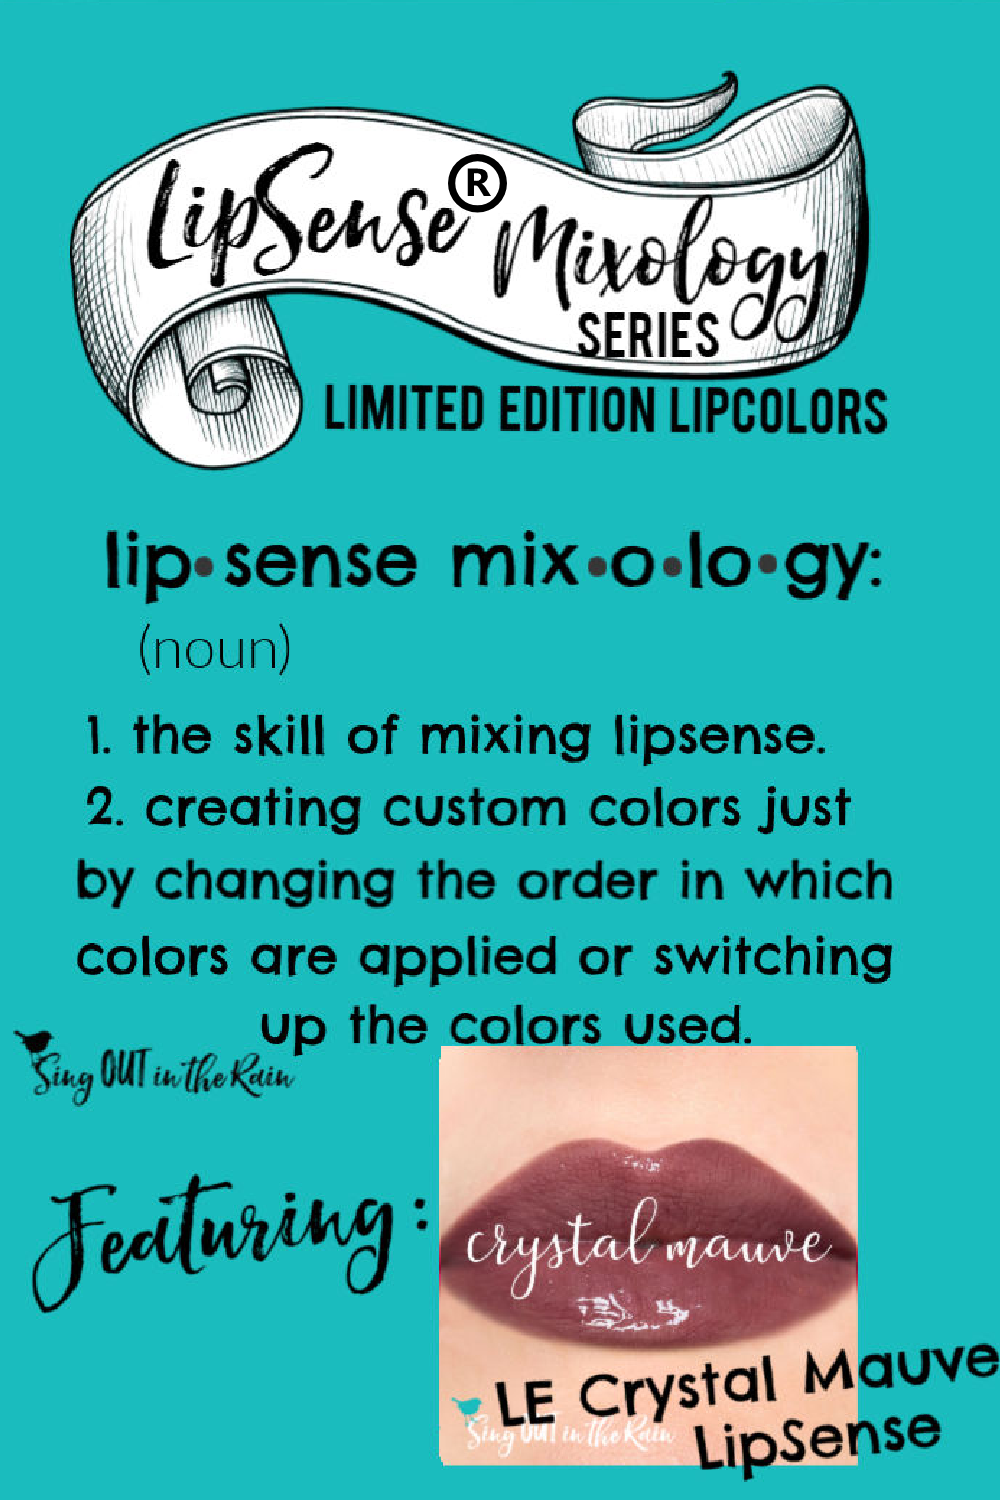 The Ultimate Guide to Crystal Mauve LipSense Mixology